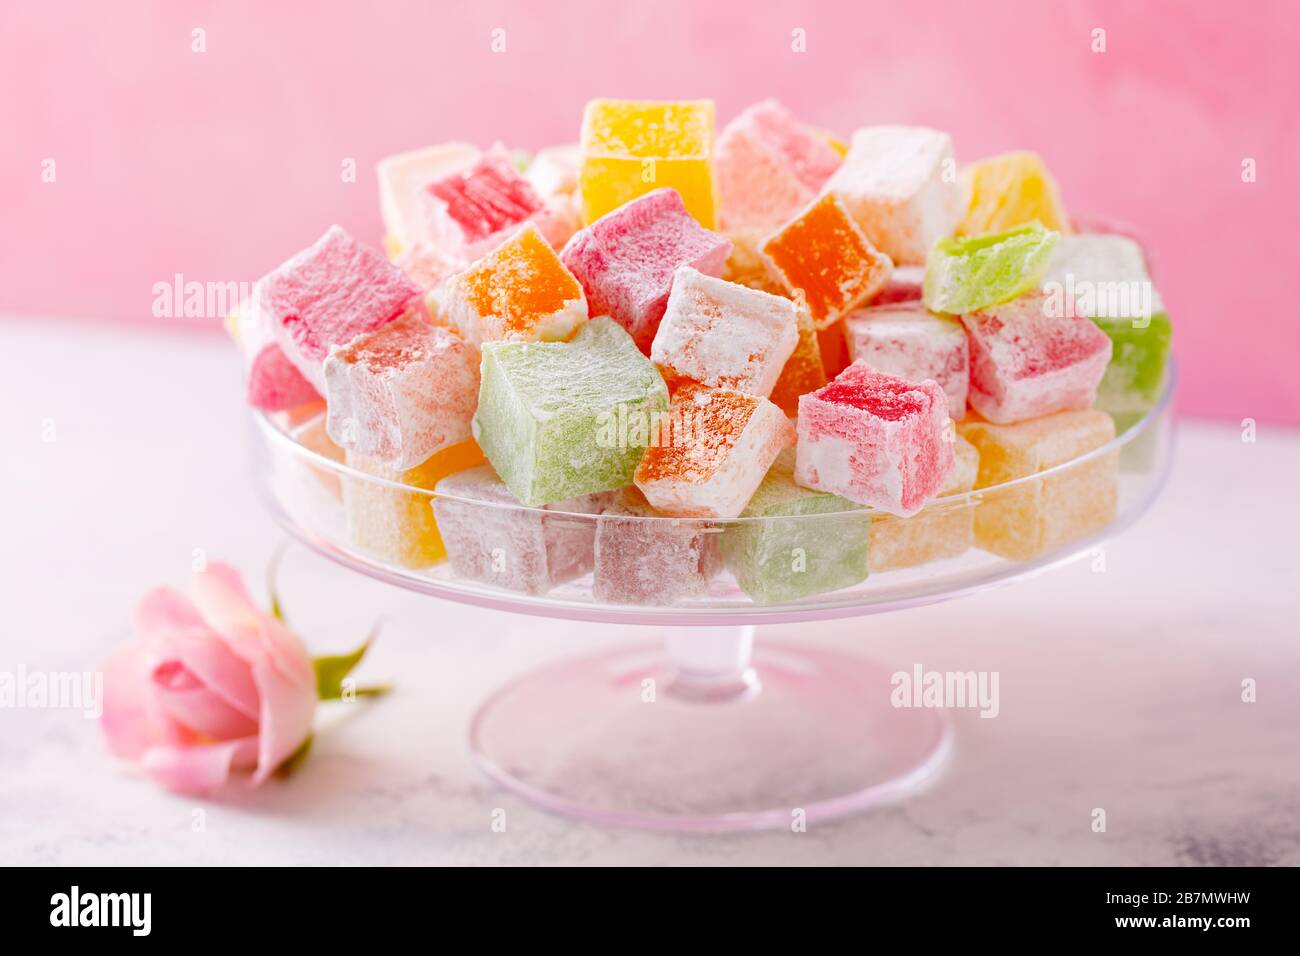 Assorted Turkish delights on glass cake stand. Pink background. Close up. Stock Photo